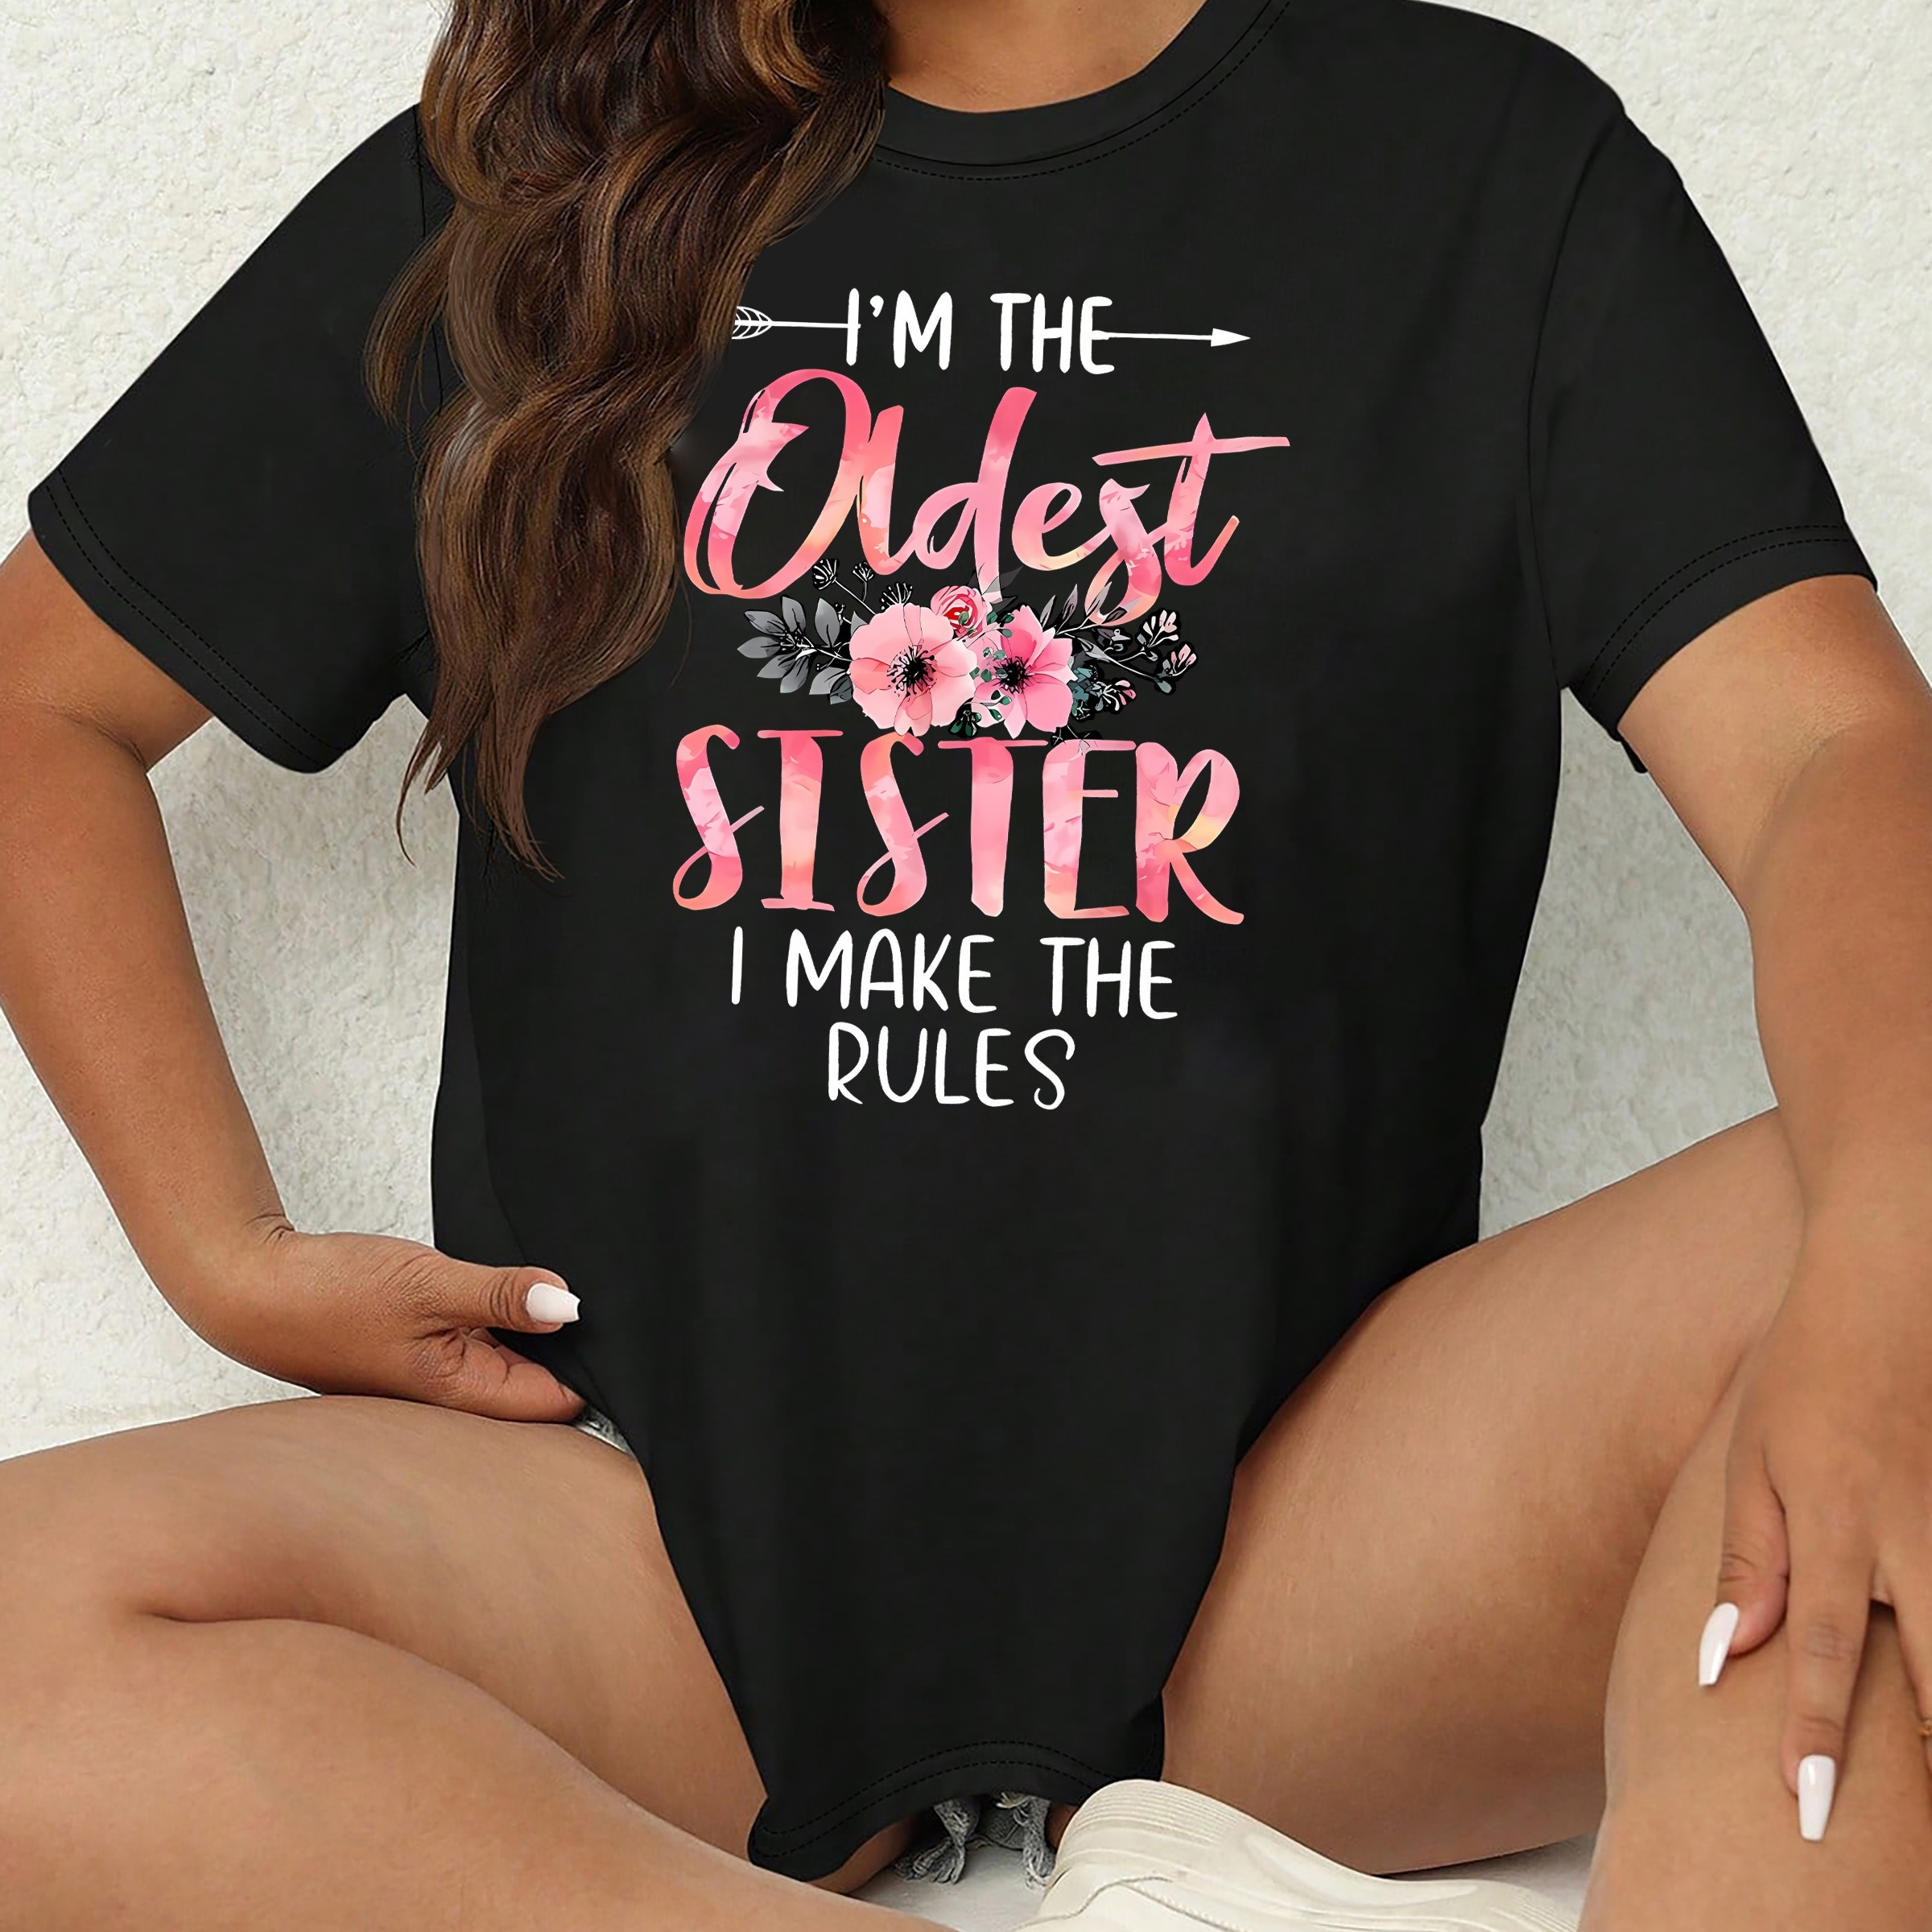 

Women's Plus Size Casual Sporty T-shirt, Floral "i'm The Oldest Sister I Make The Rules" Print, Comfort Fit Short Sleeve Tee, Fashion Breathable Casual Top